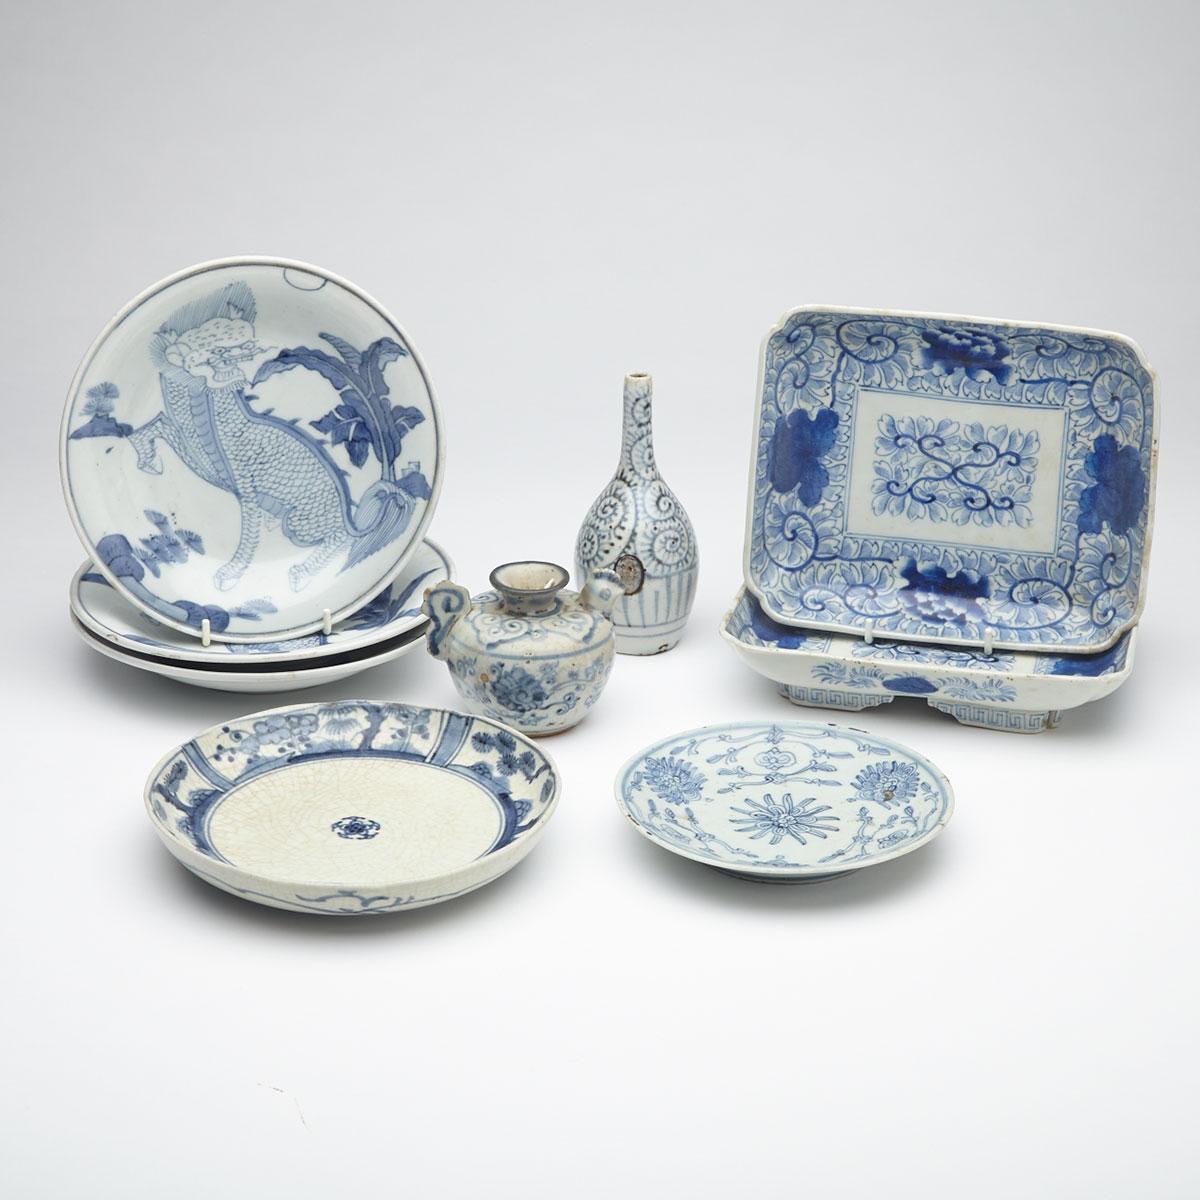 Group of Nine Blue and White Export Wares, South East Asian